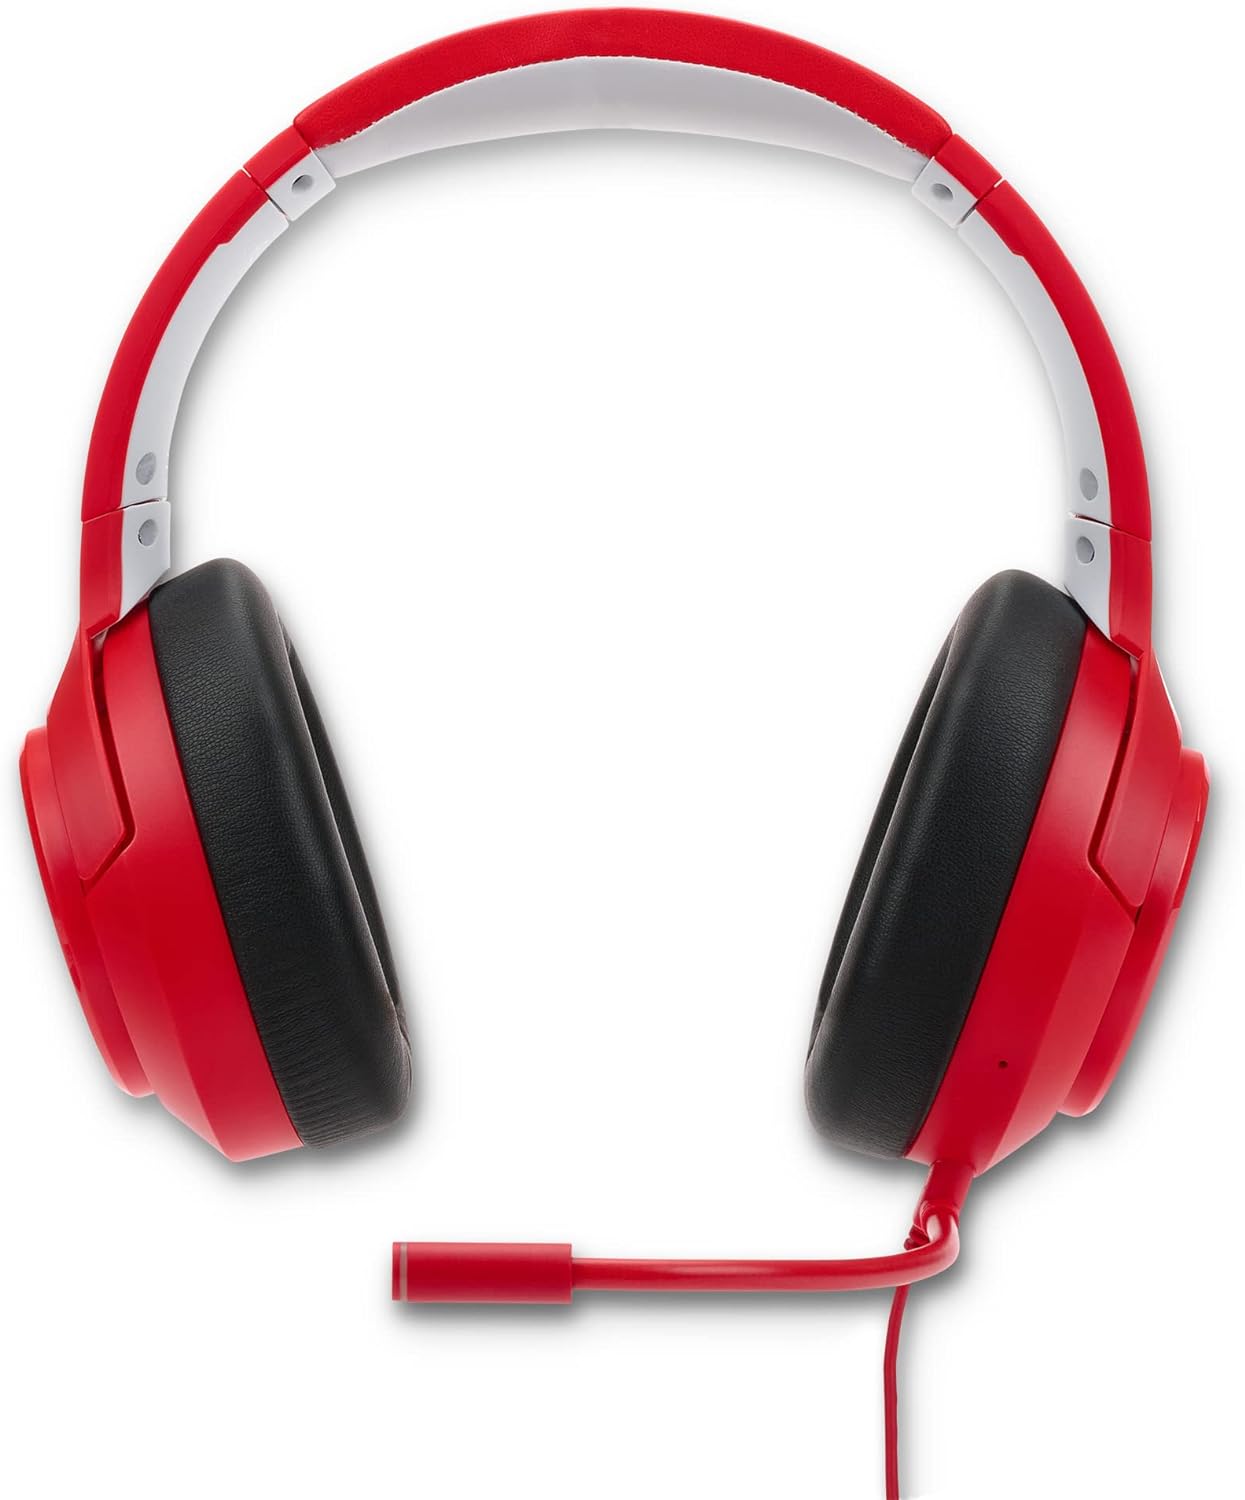 LucidSound LS10X Wired Gaming Headset for Xbox Series X|S - Pulse Red (Certified Refurbished)